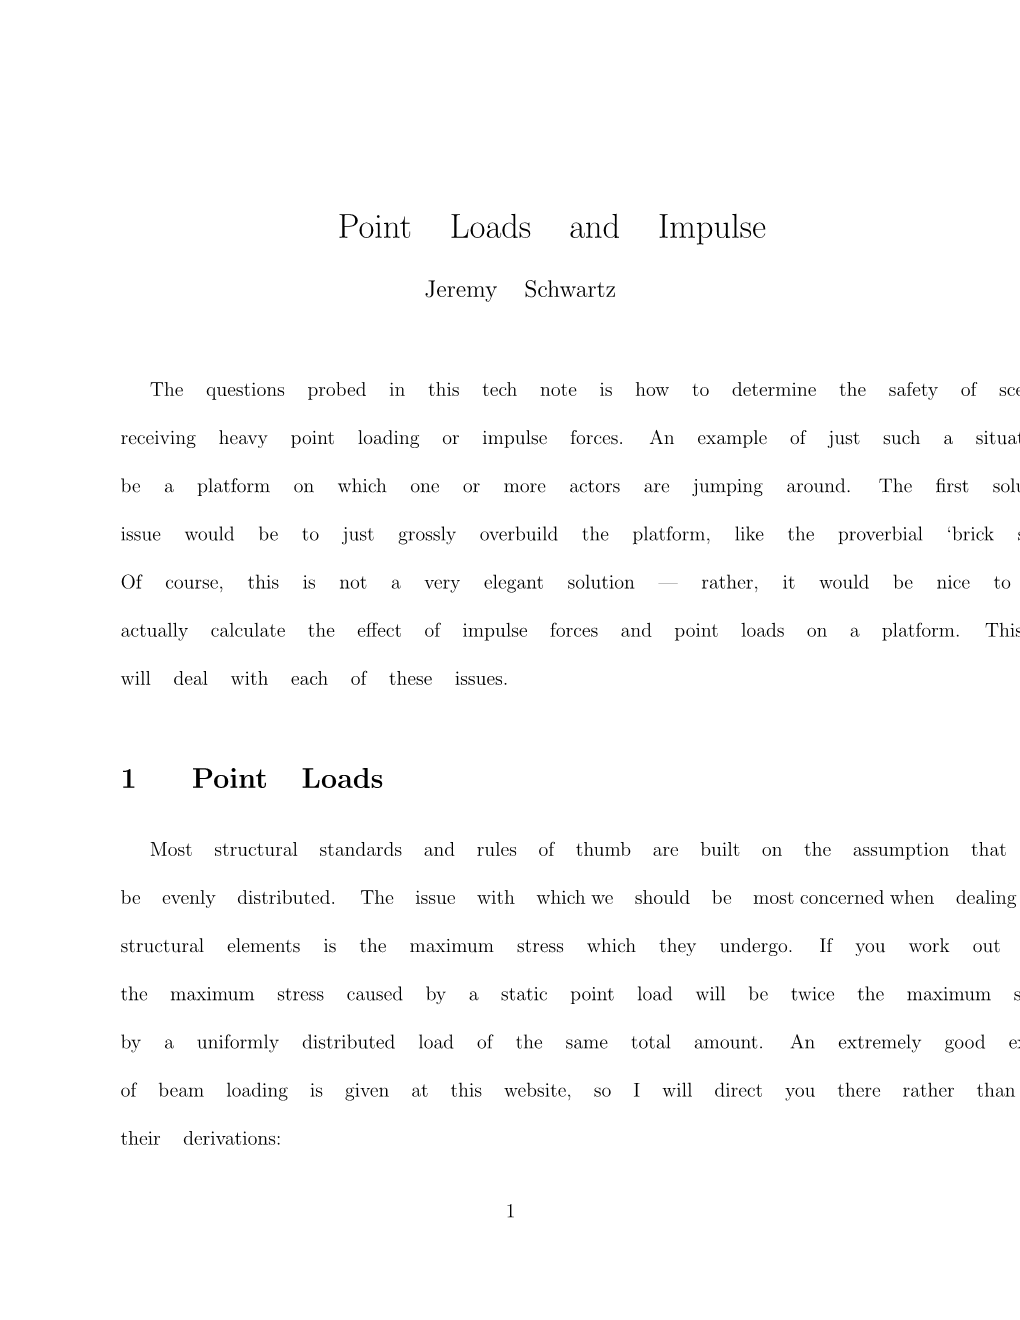 Point Loads and Impulse